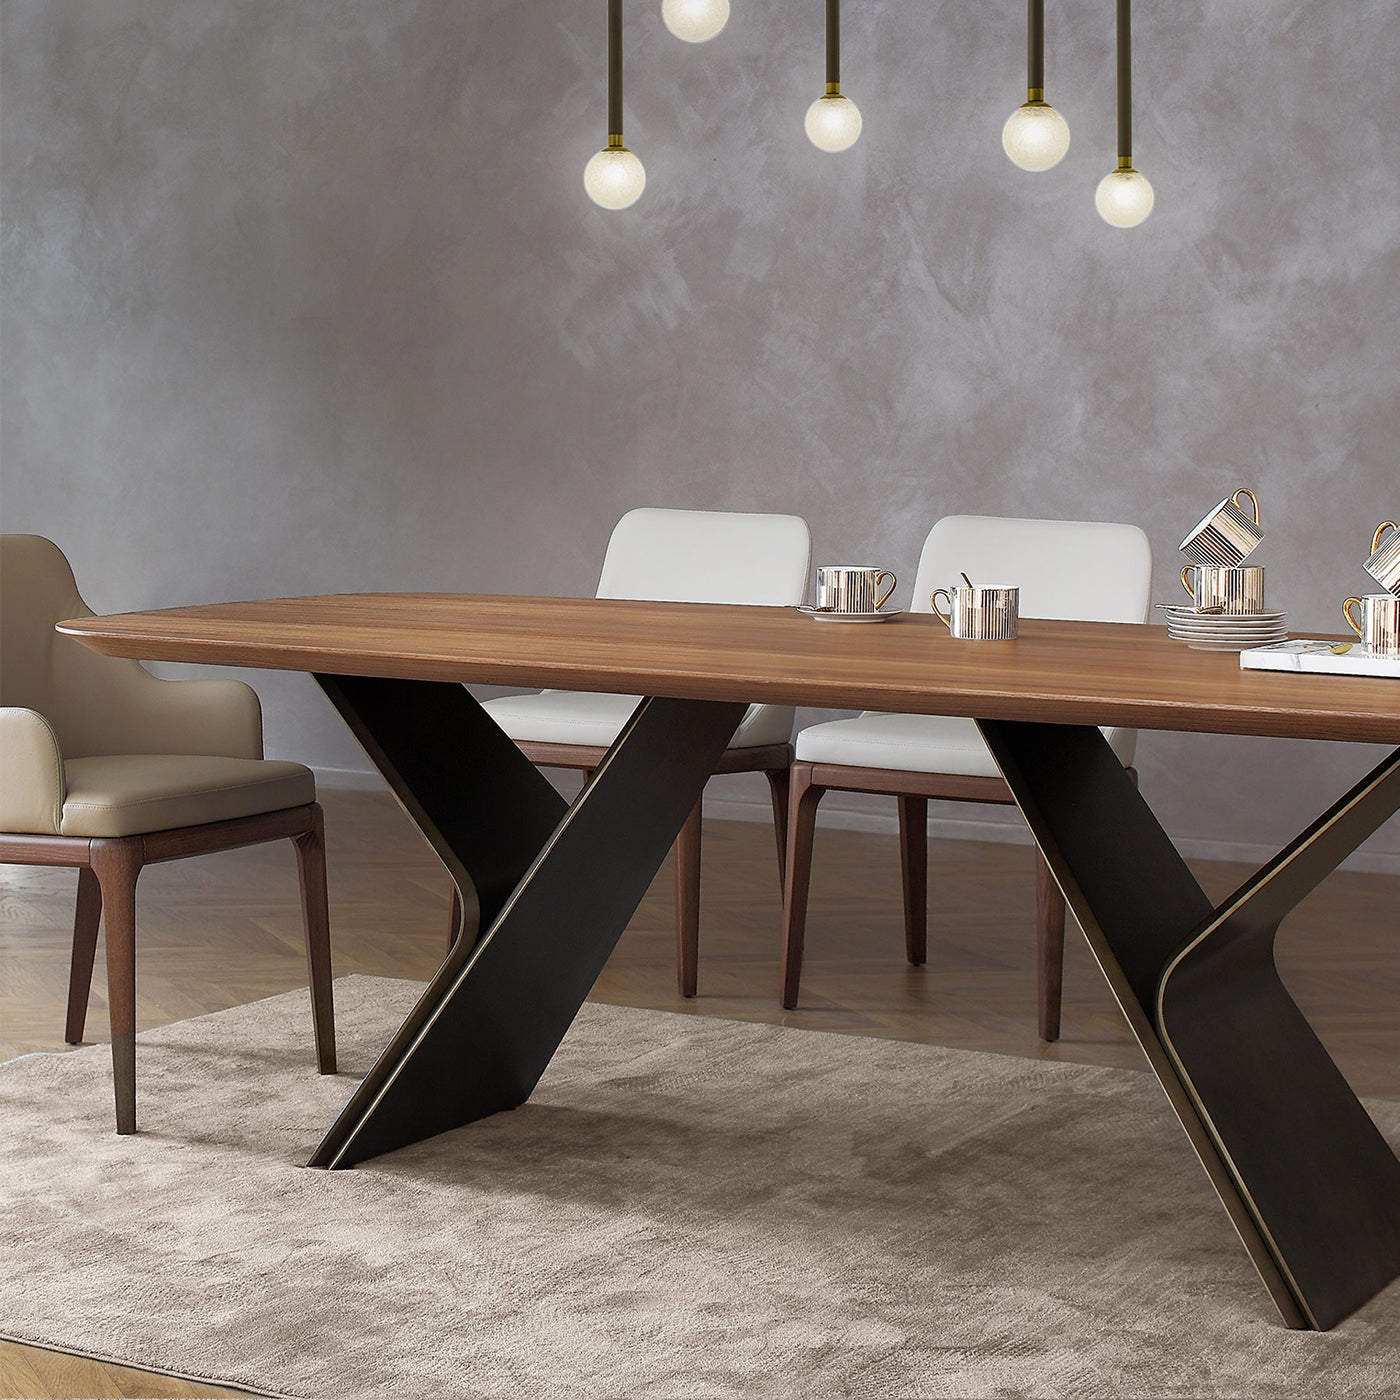 Metaverso Canaletto Walnut Wood Table - Alternative view 2